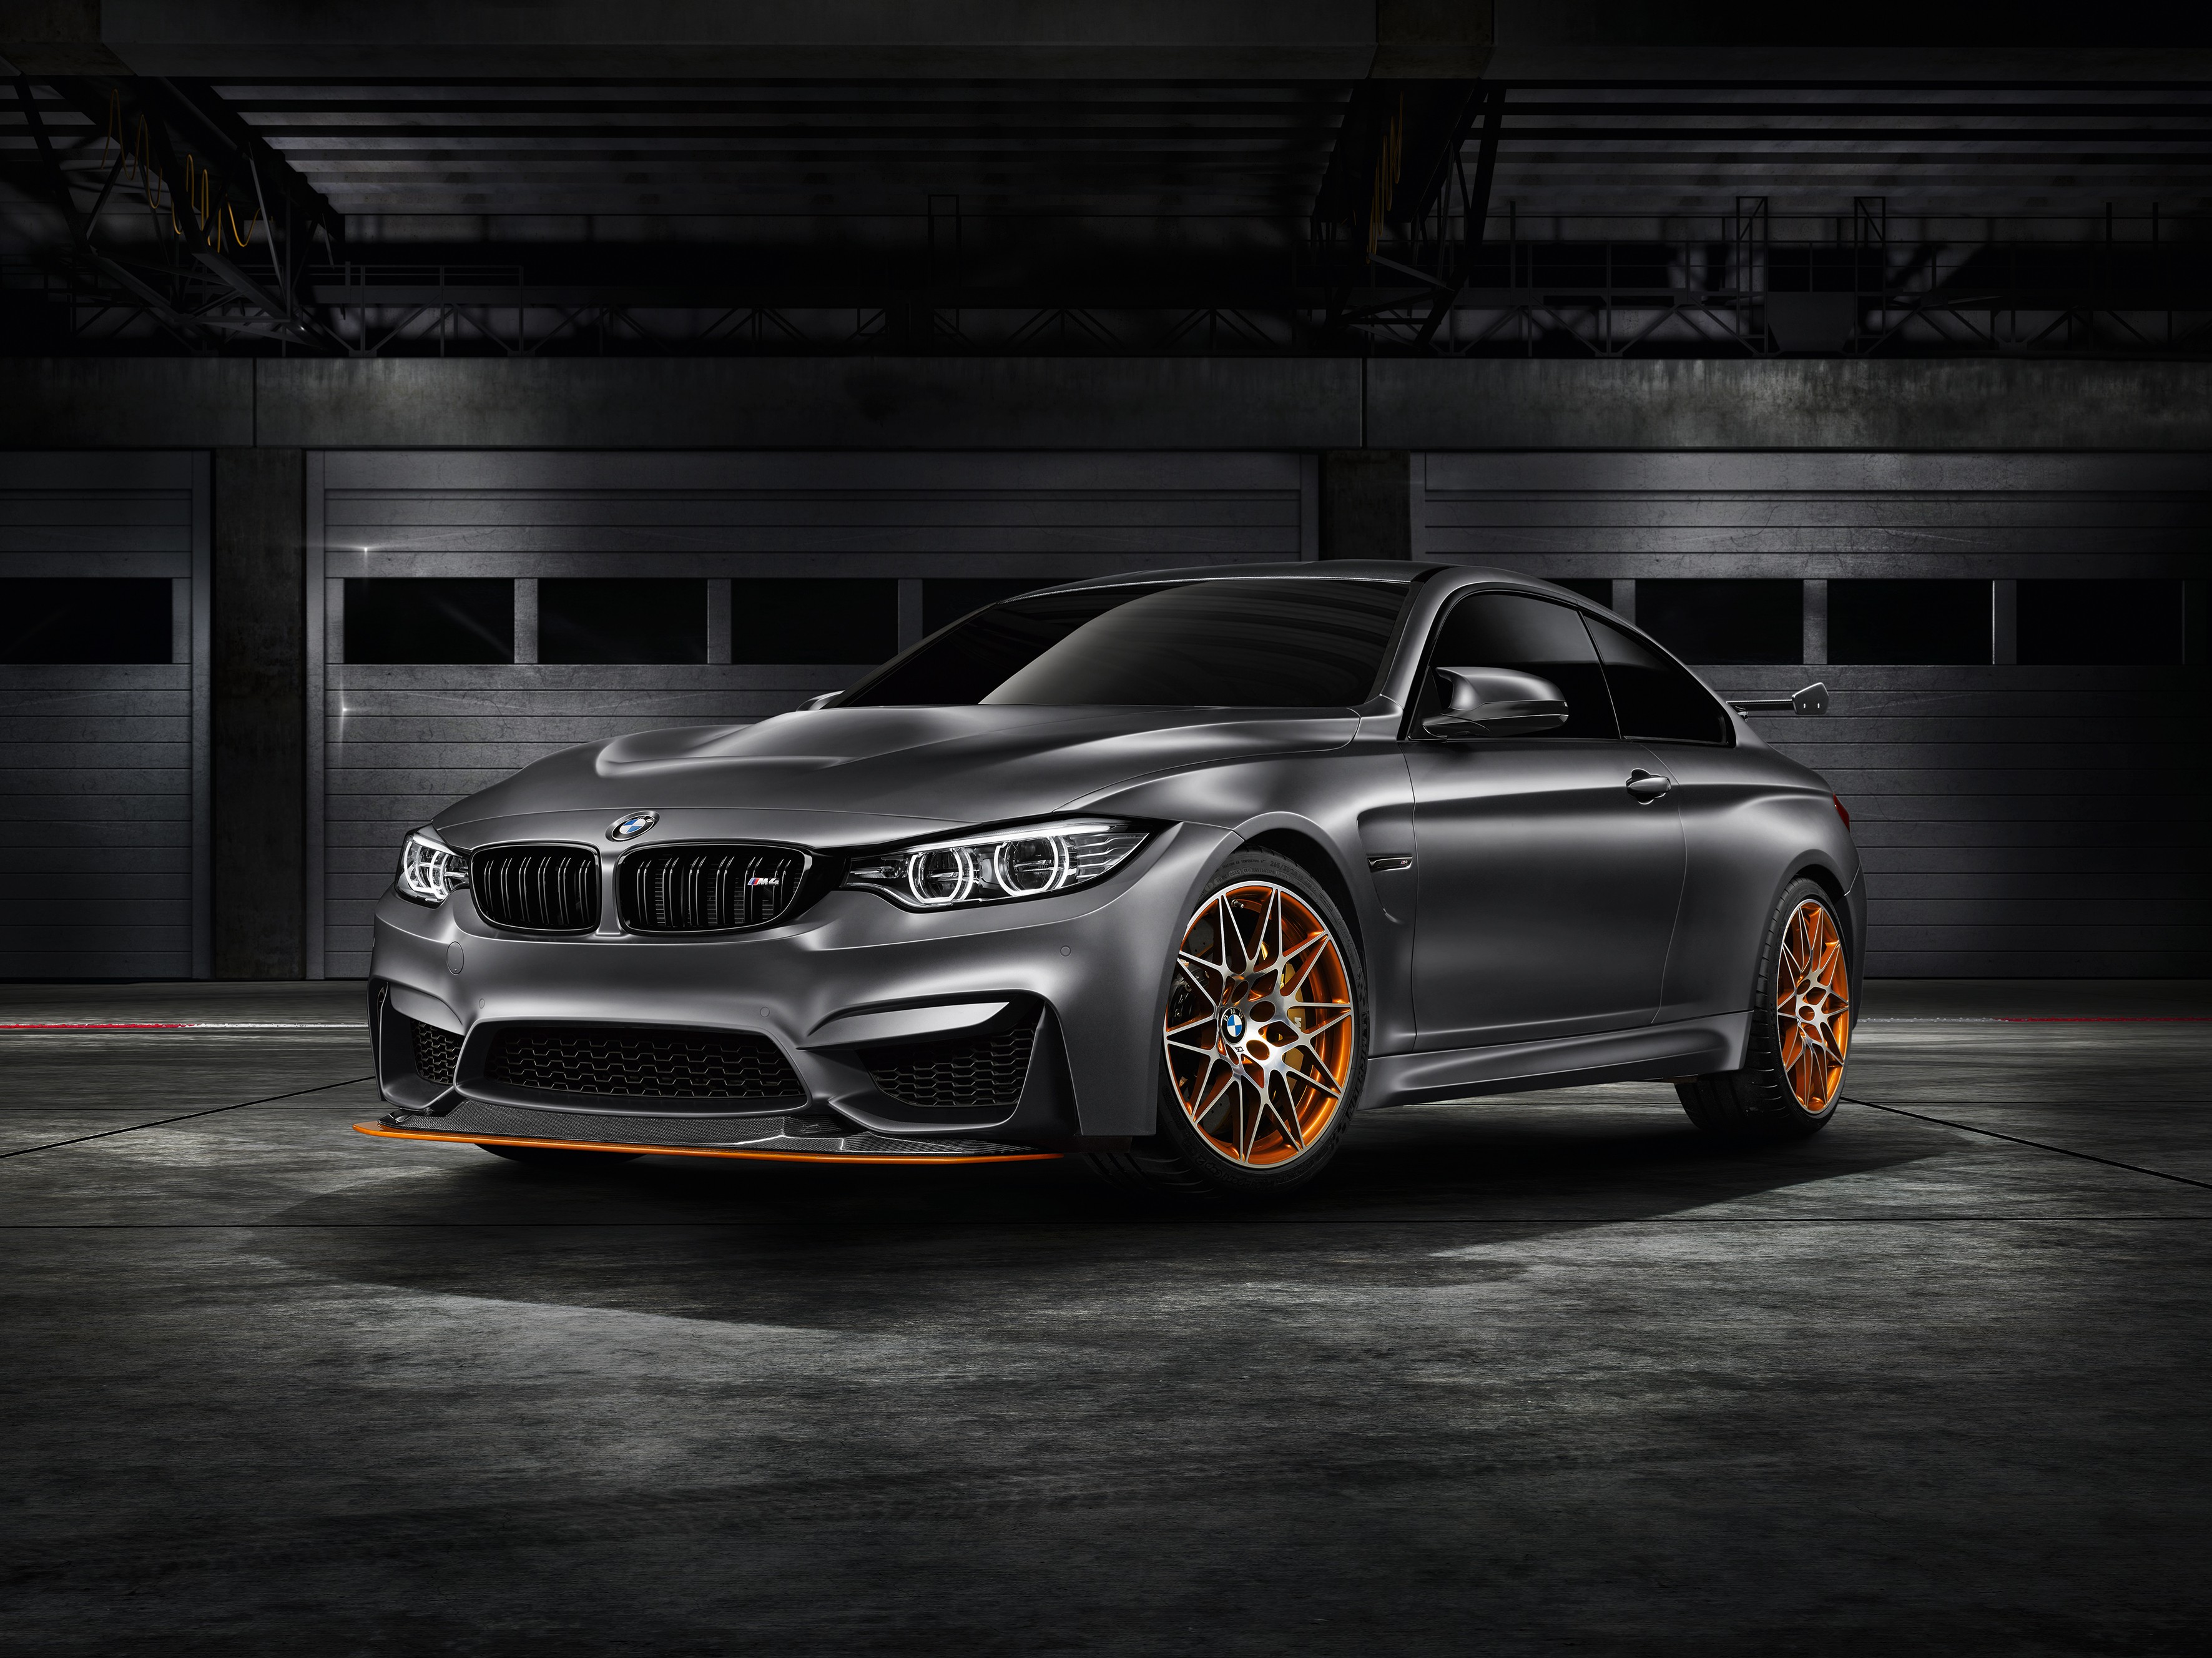 bmw-concept-m4-gts-makes-world-debut-at-pebble-beach-with-oled-lighting-photo-gallery_2